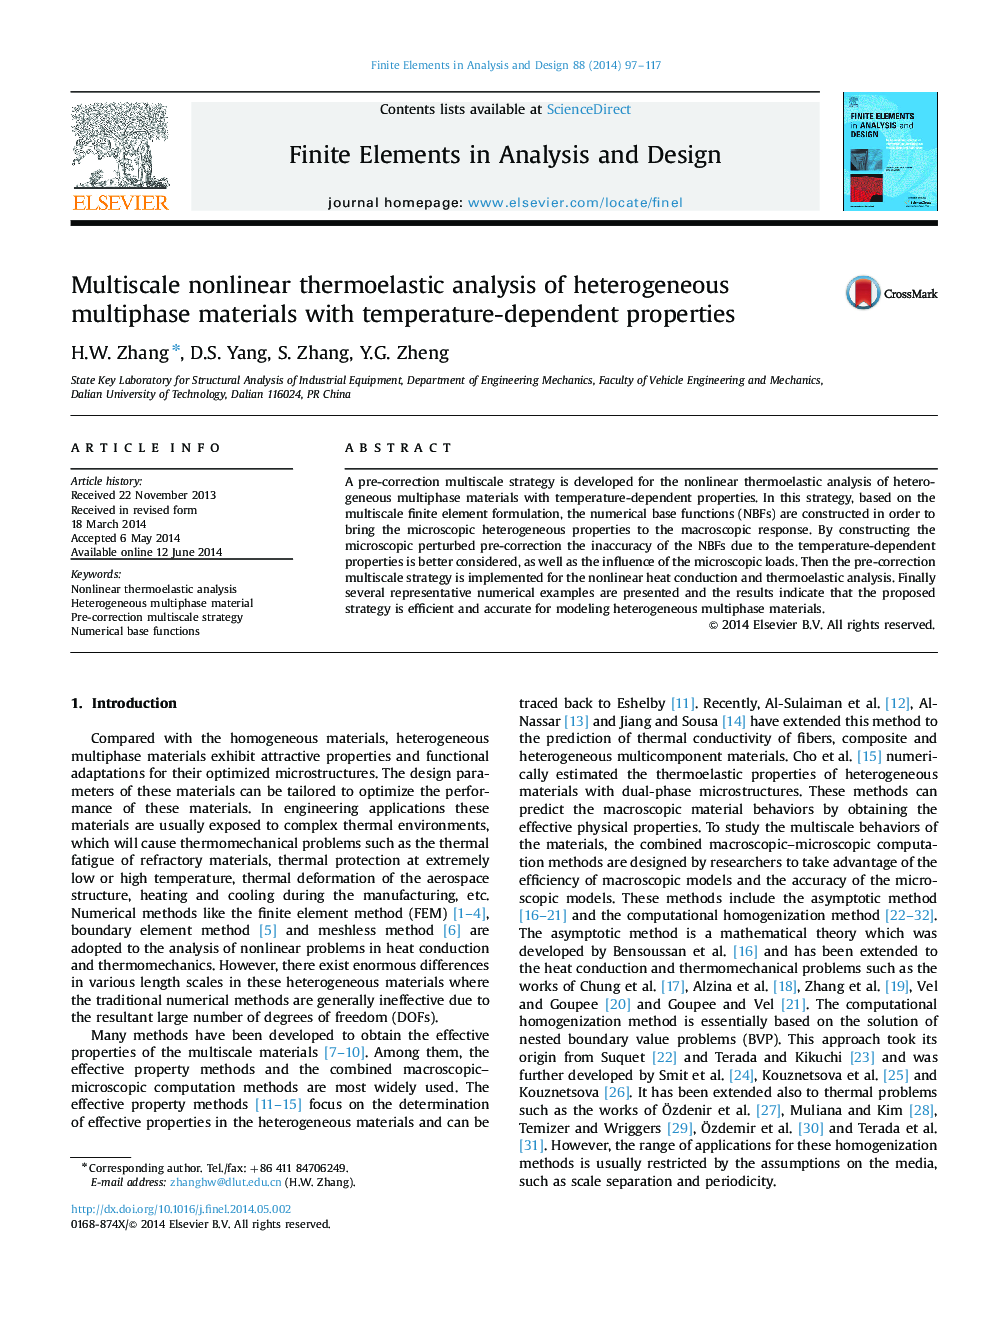 Multiscale nonlinear thermoelastic analysis of heterogeneous multiphase materials with temperature-dependent properties